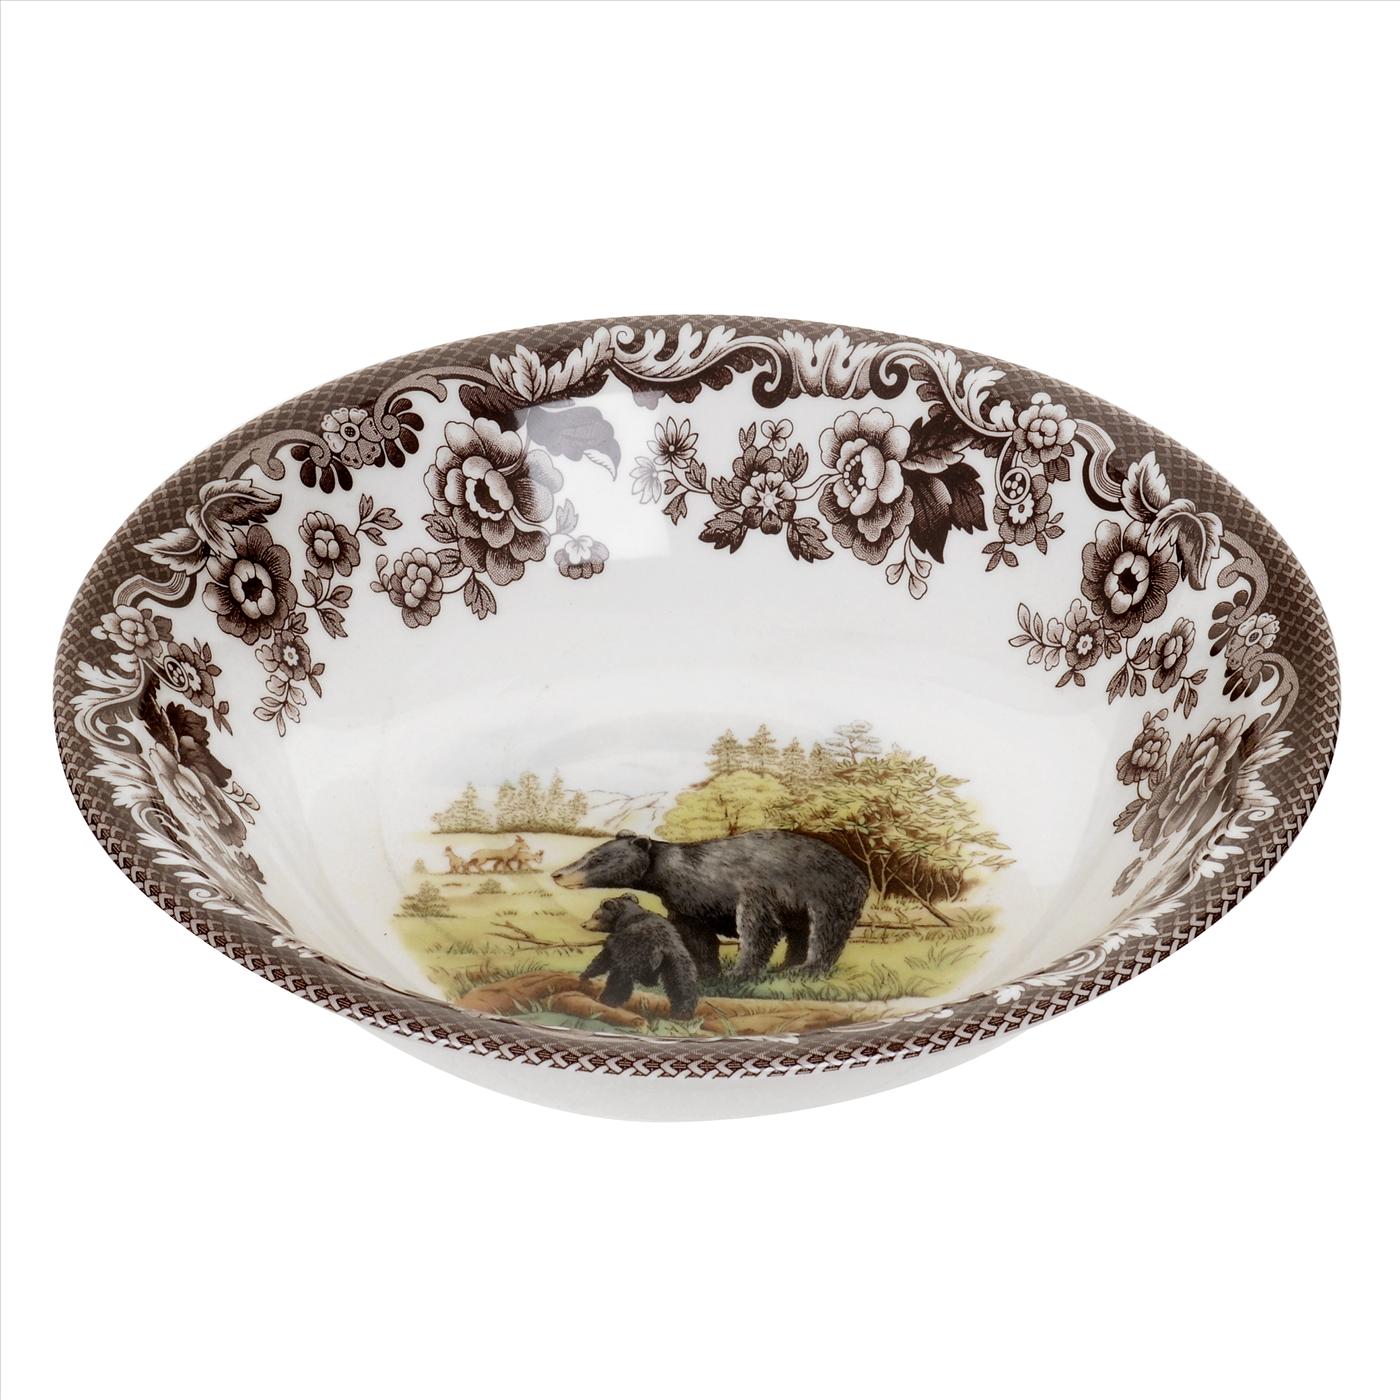 Woodland Ascot Cereal Bowl 8 Inch, Black Bear image number null